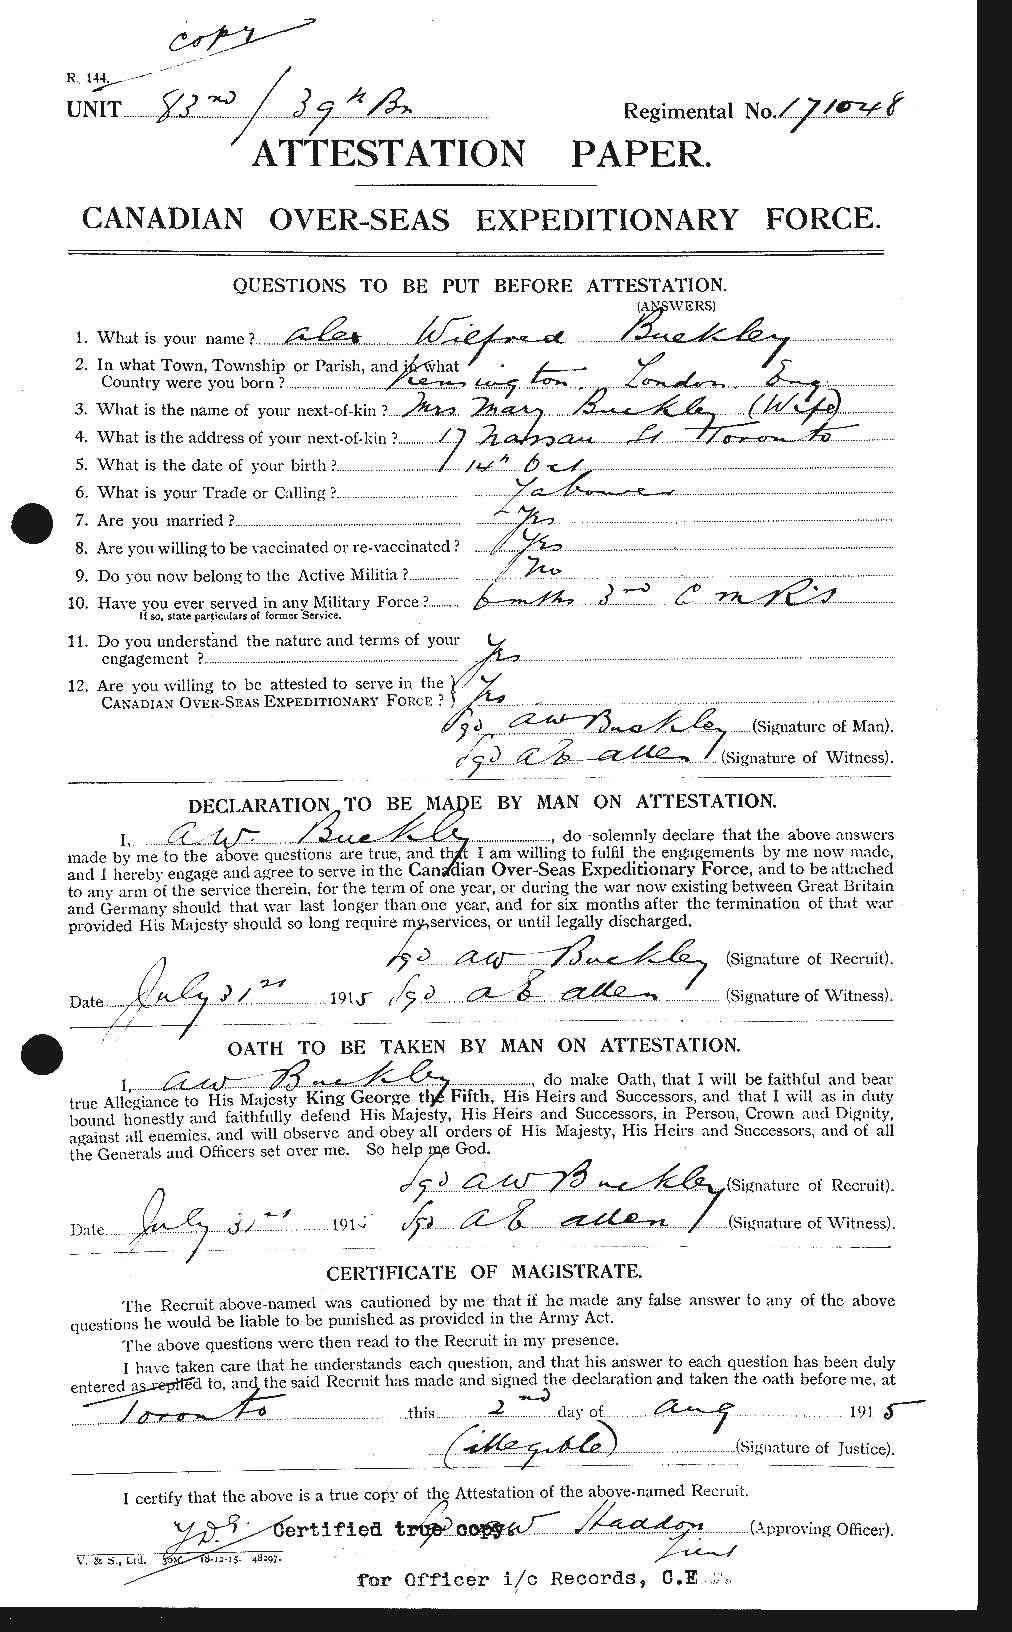 Personnel Records of the First World War - CEF 270191a